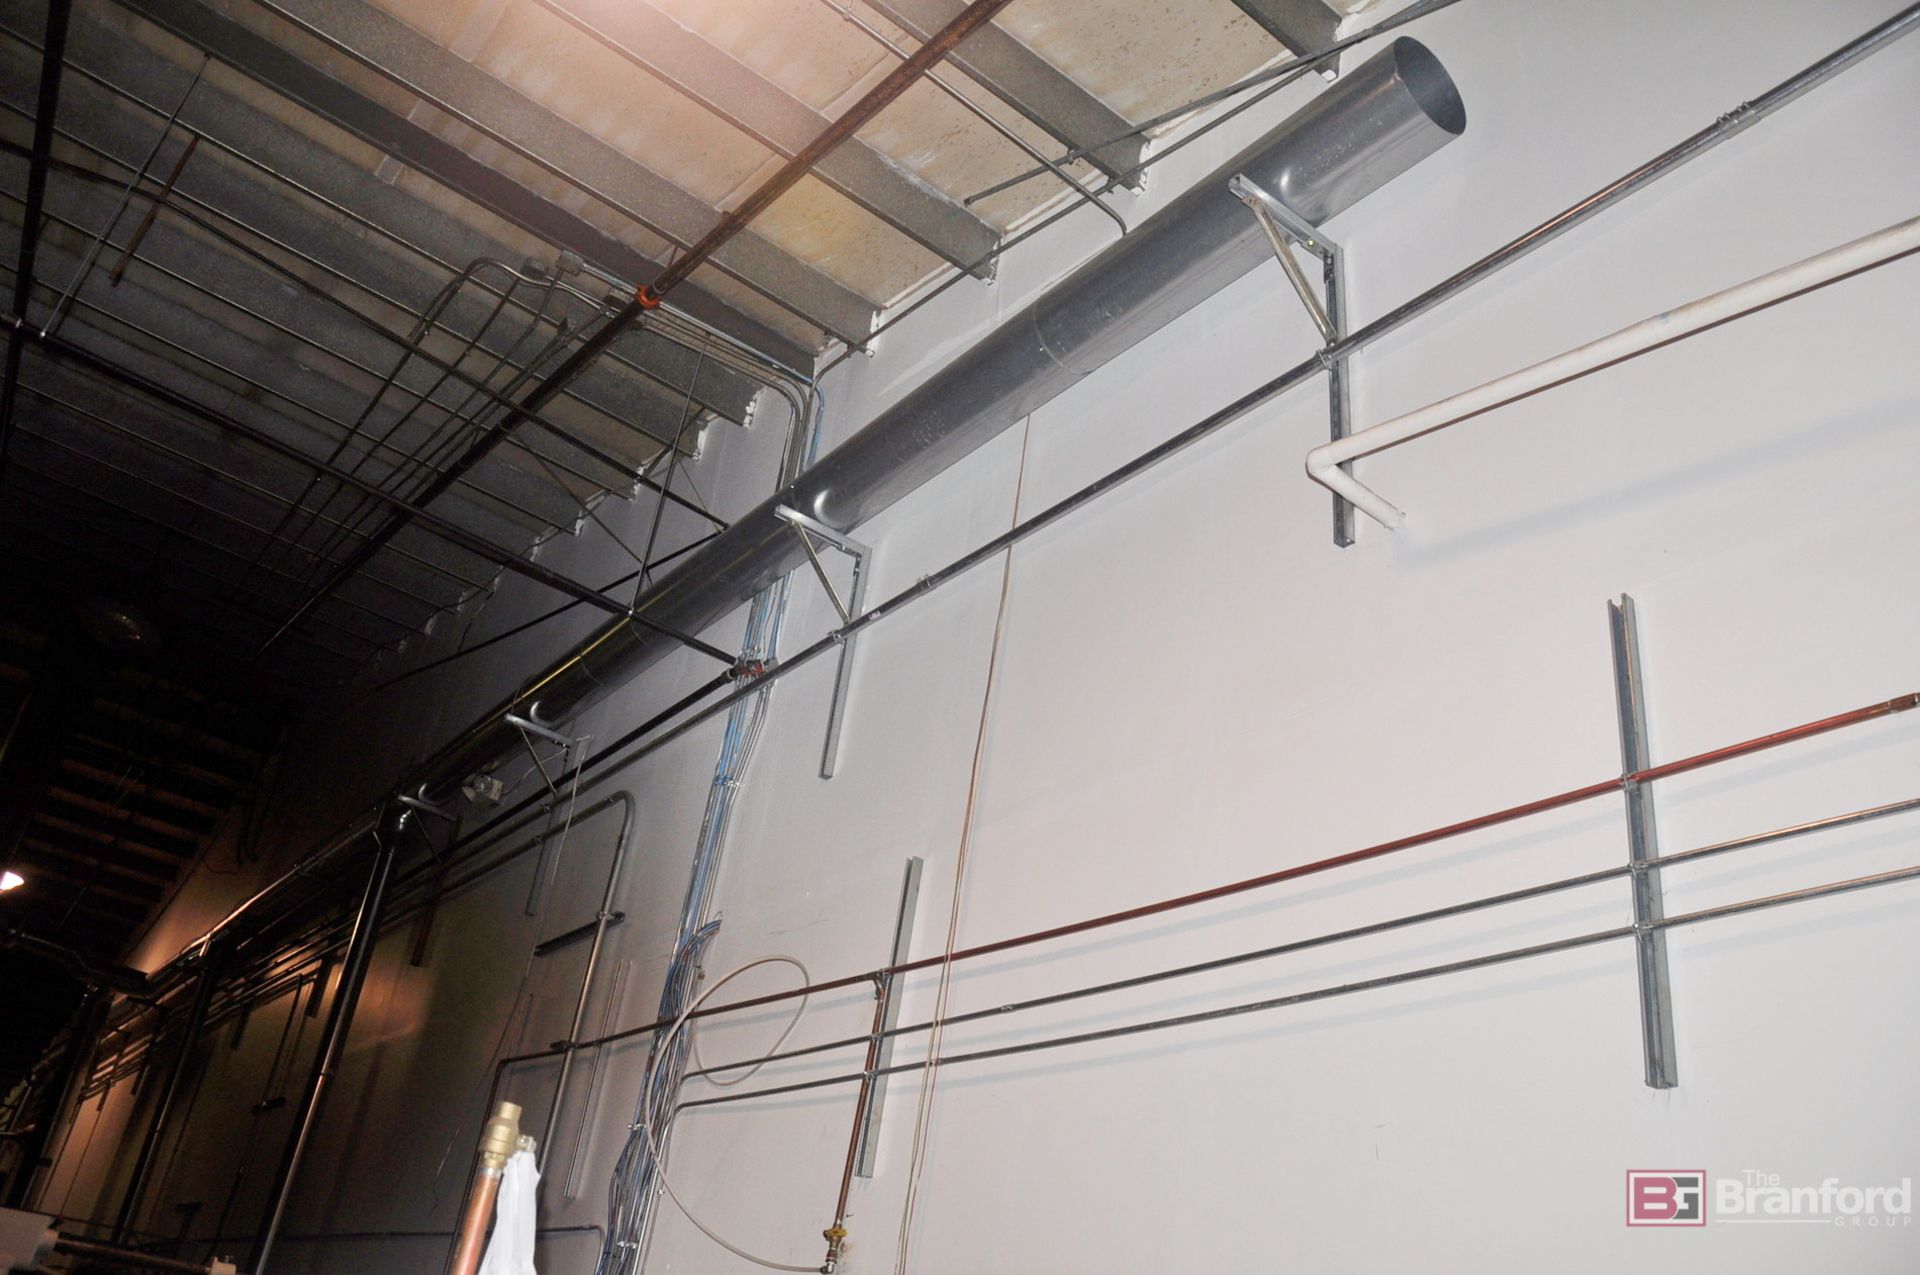 Industrial exhaust system - Image 8 of 13